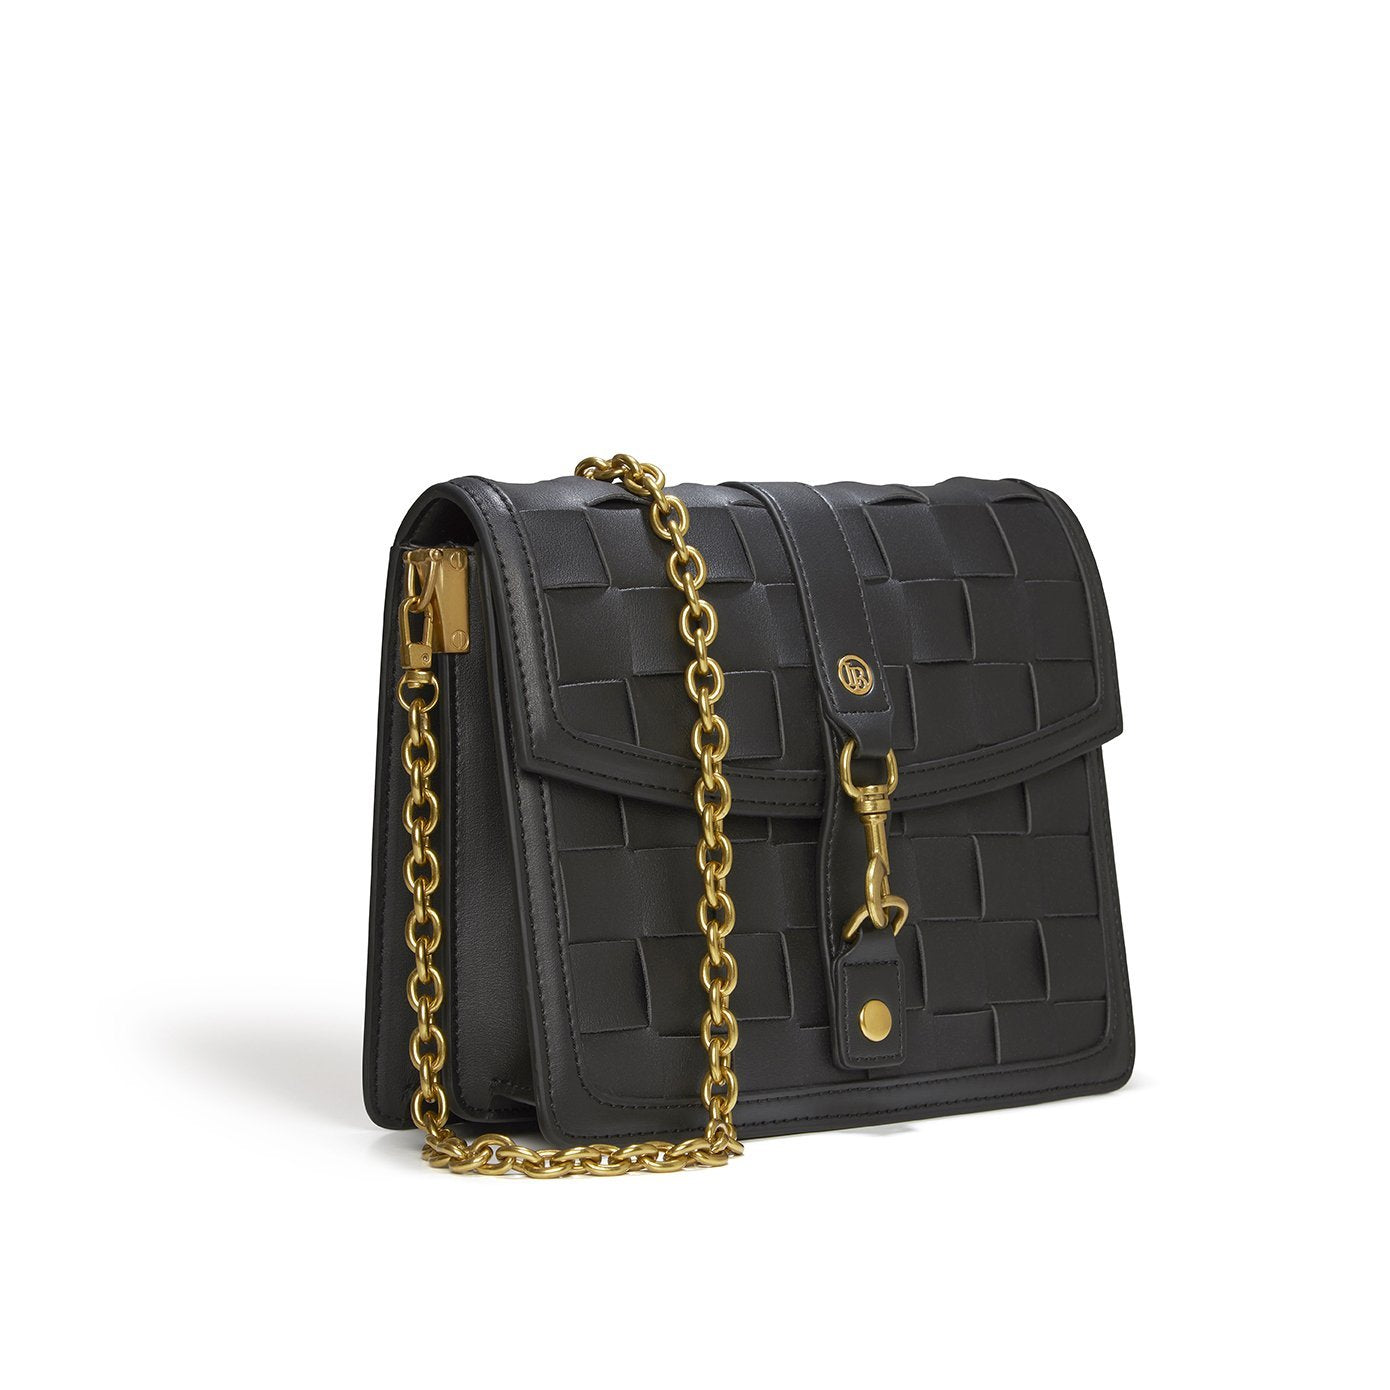 Daisy Black Crossbody Weave bag with 2 straps